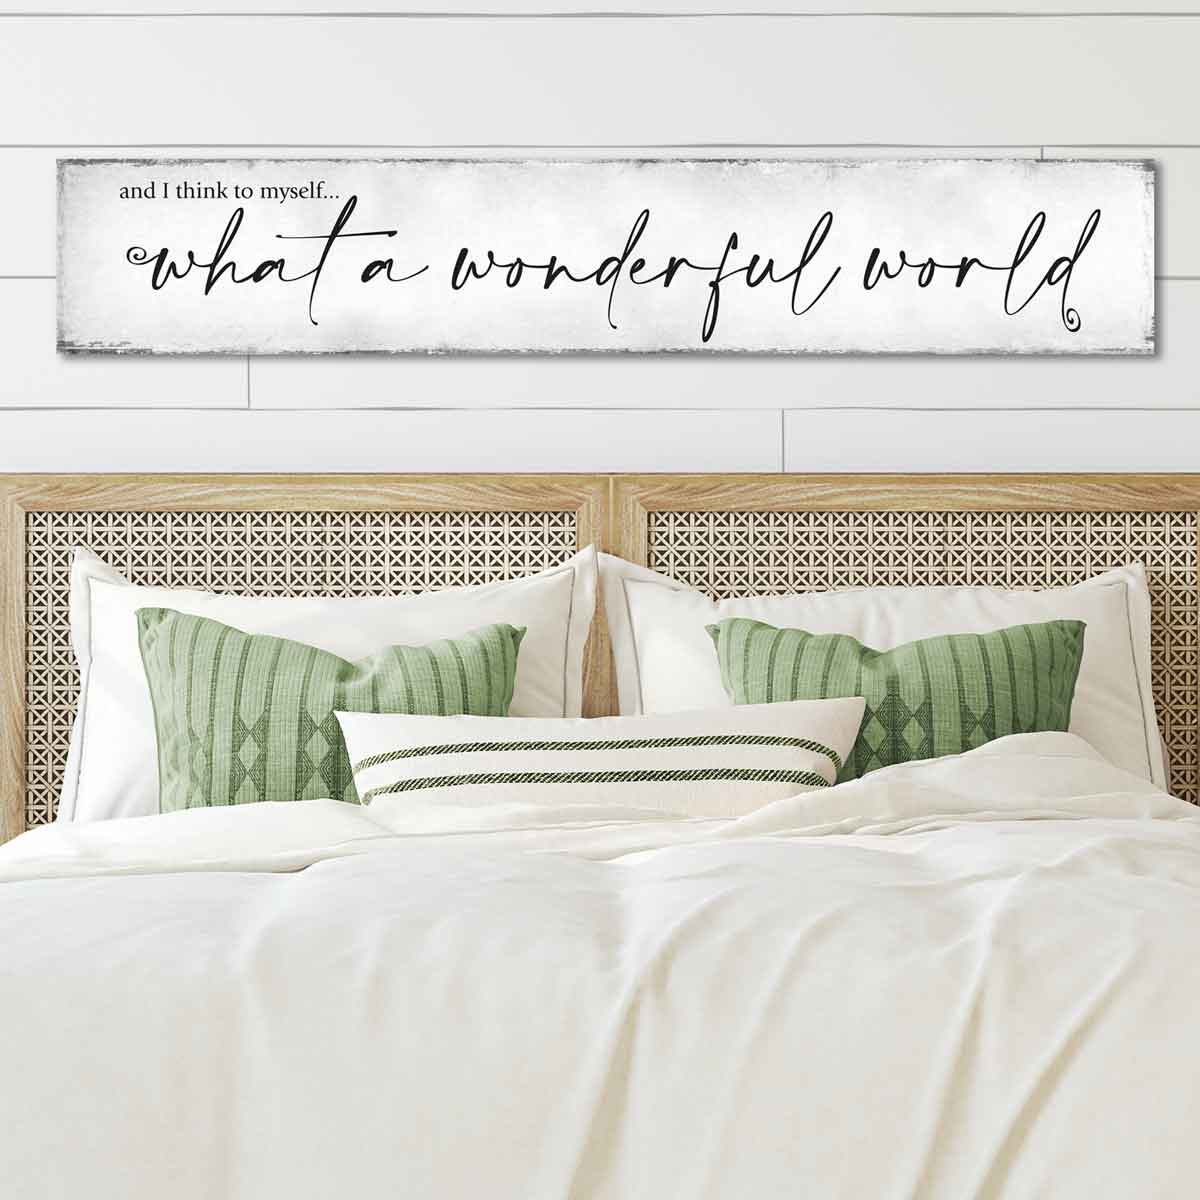 Reads "and I think to myself... what a wonderful world" on distressed white background